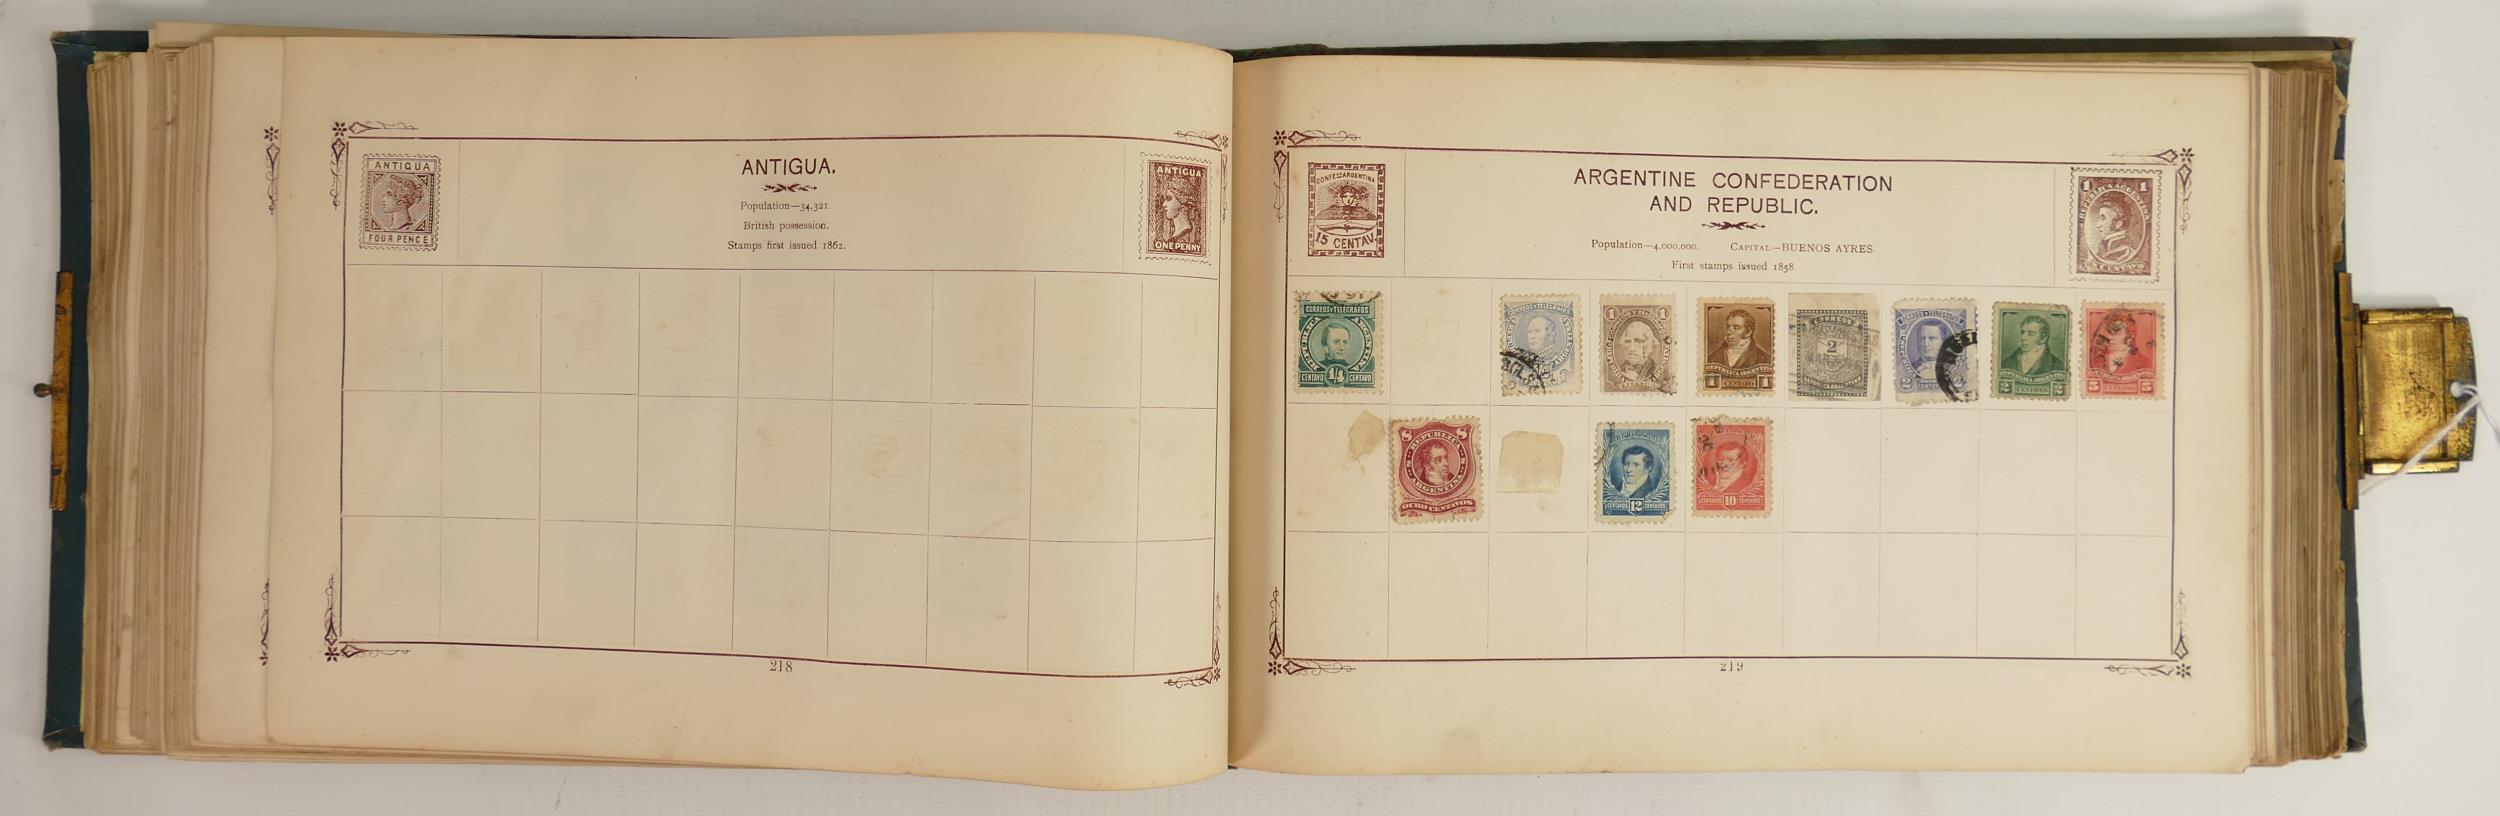 Early 20th Century International Stamp Collection & Blinder - Image 8 of 10